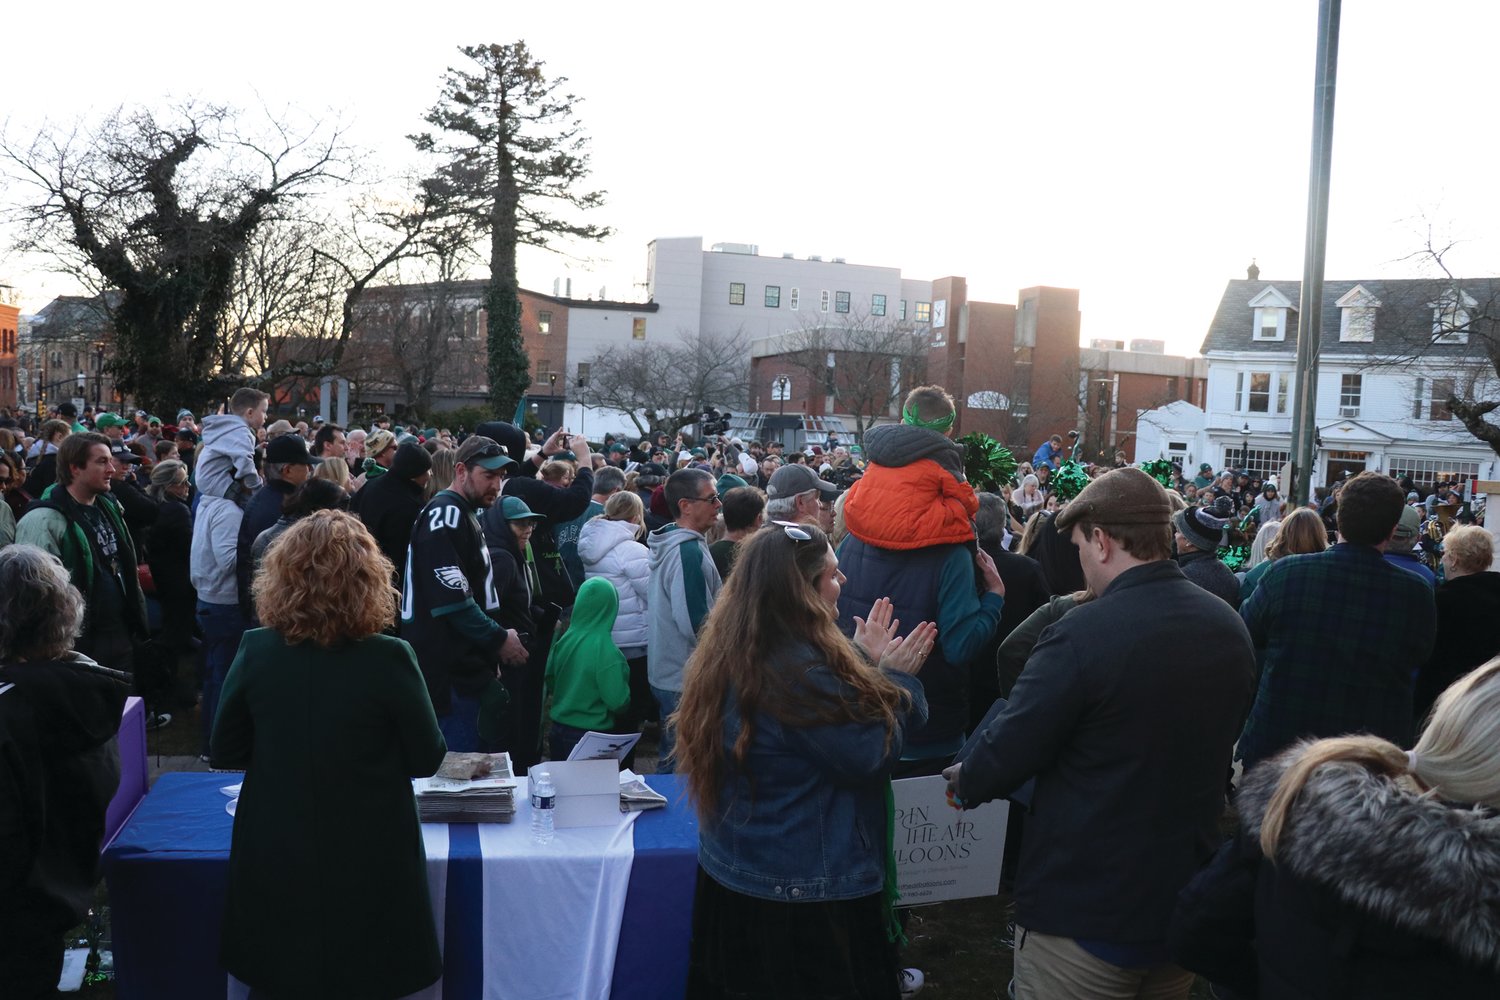 The view of the old courthouse lawn from the Bucks County Herald’s table at the “Bucks County Loves the Birds” pep rally last Friday shows the throngs of Eagles fans who gathered outside on a February Friday evening to celebrate the Super Bowl-bound Eagles. For Herald Editor-in-Chief John Anastasi, though, it was a celebration of community and teamwork.